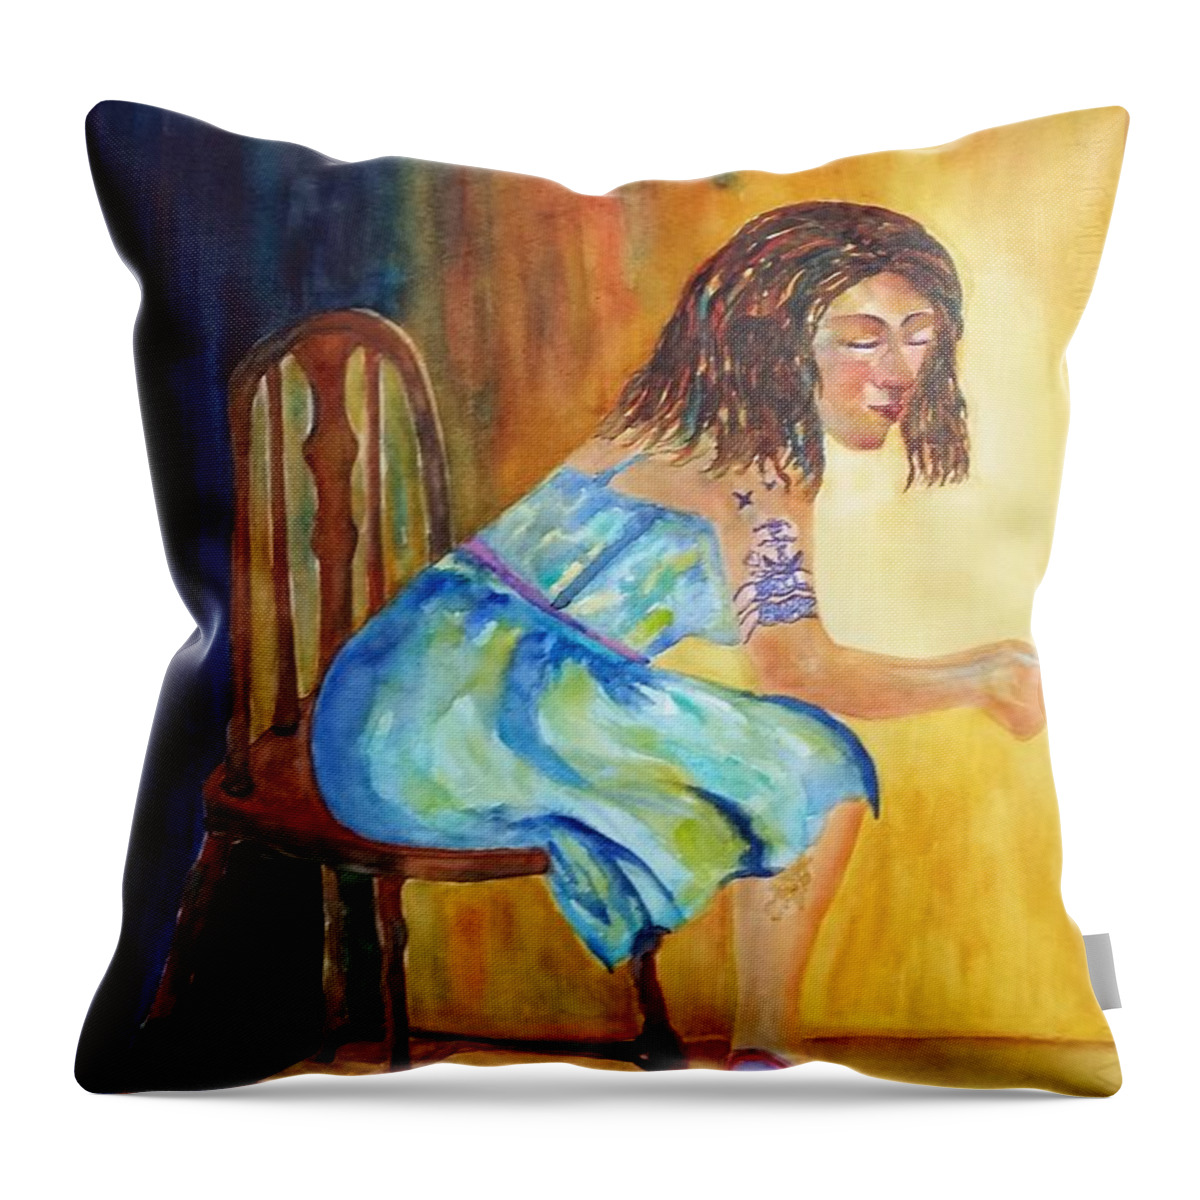 Girl With Tatoo Throw Pillow featuring the painting Docked by Kim Shuckhart Gunns